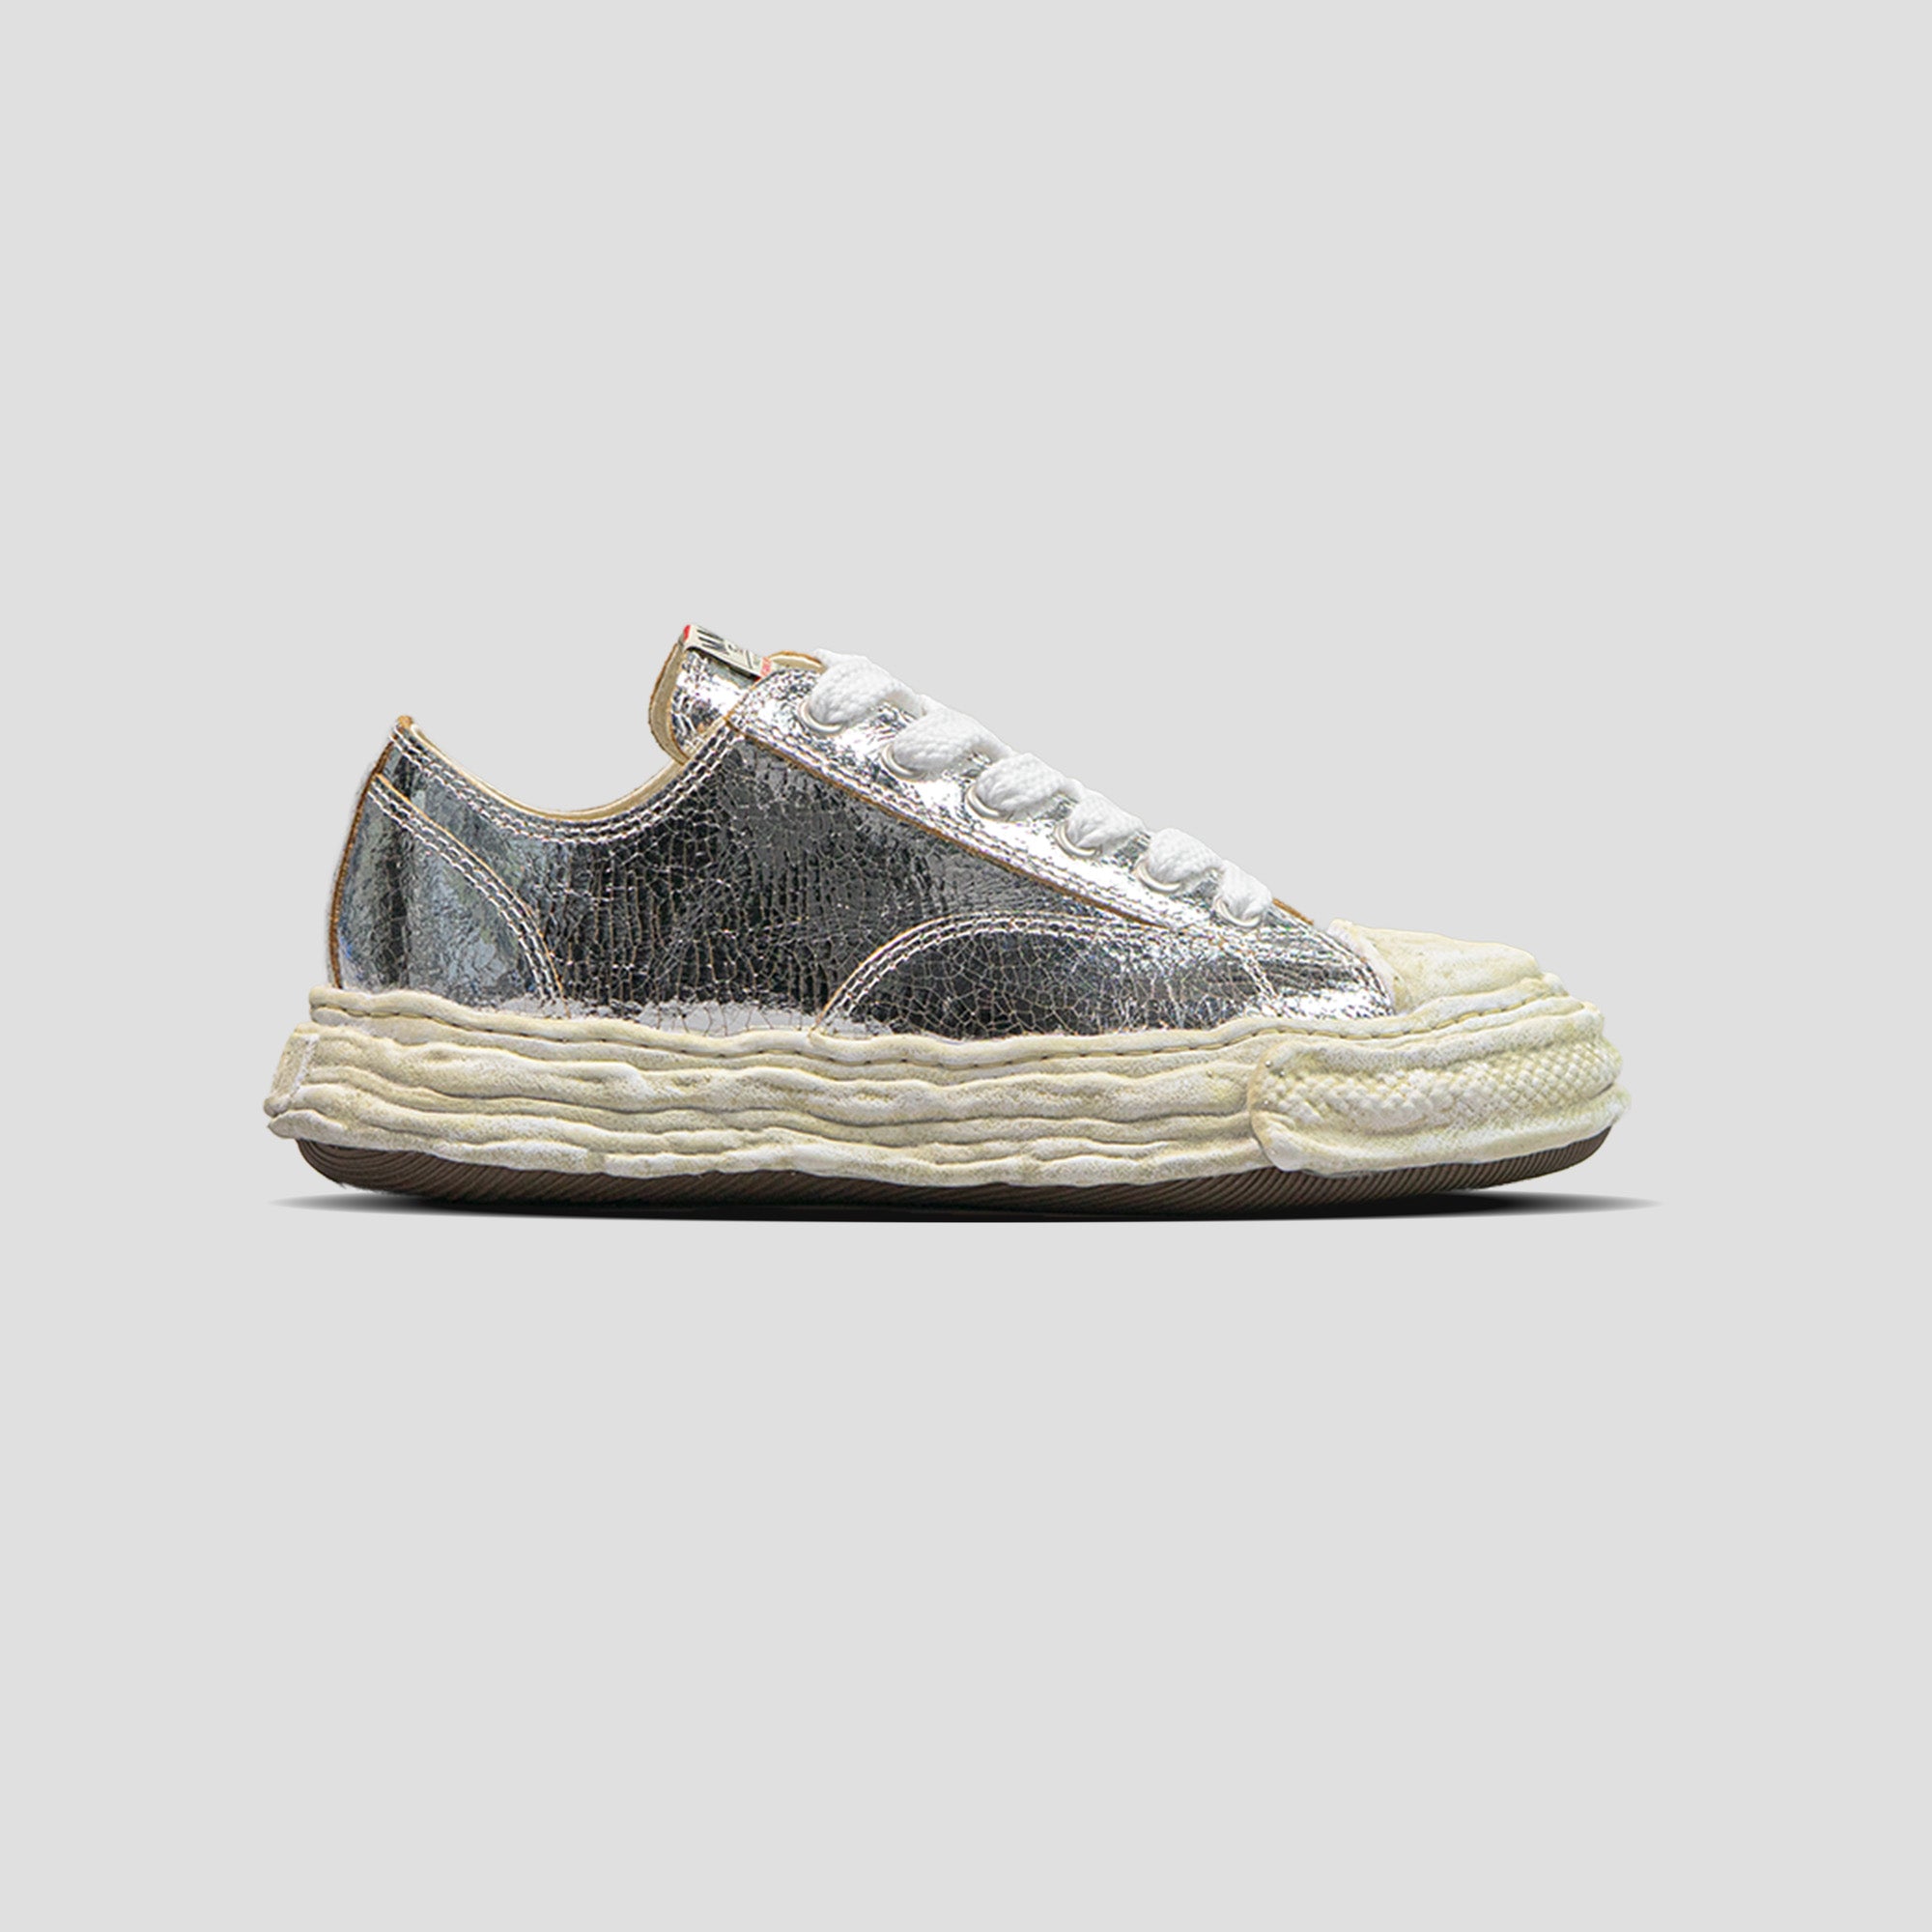 MIHARA YASUHIRO - PETERSON 23 OG SOLE LOW-TOP CRACK LEATHER SNEAKERS